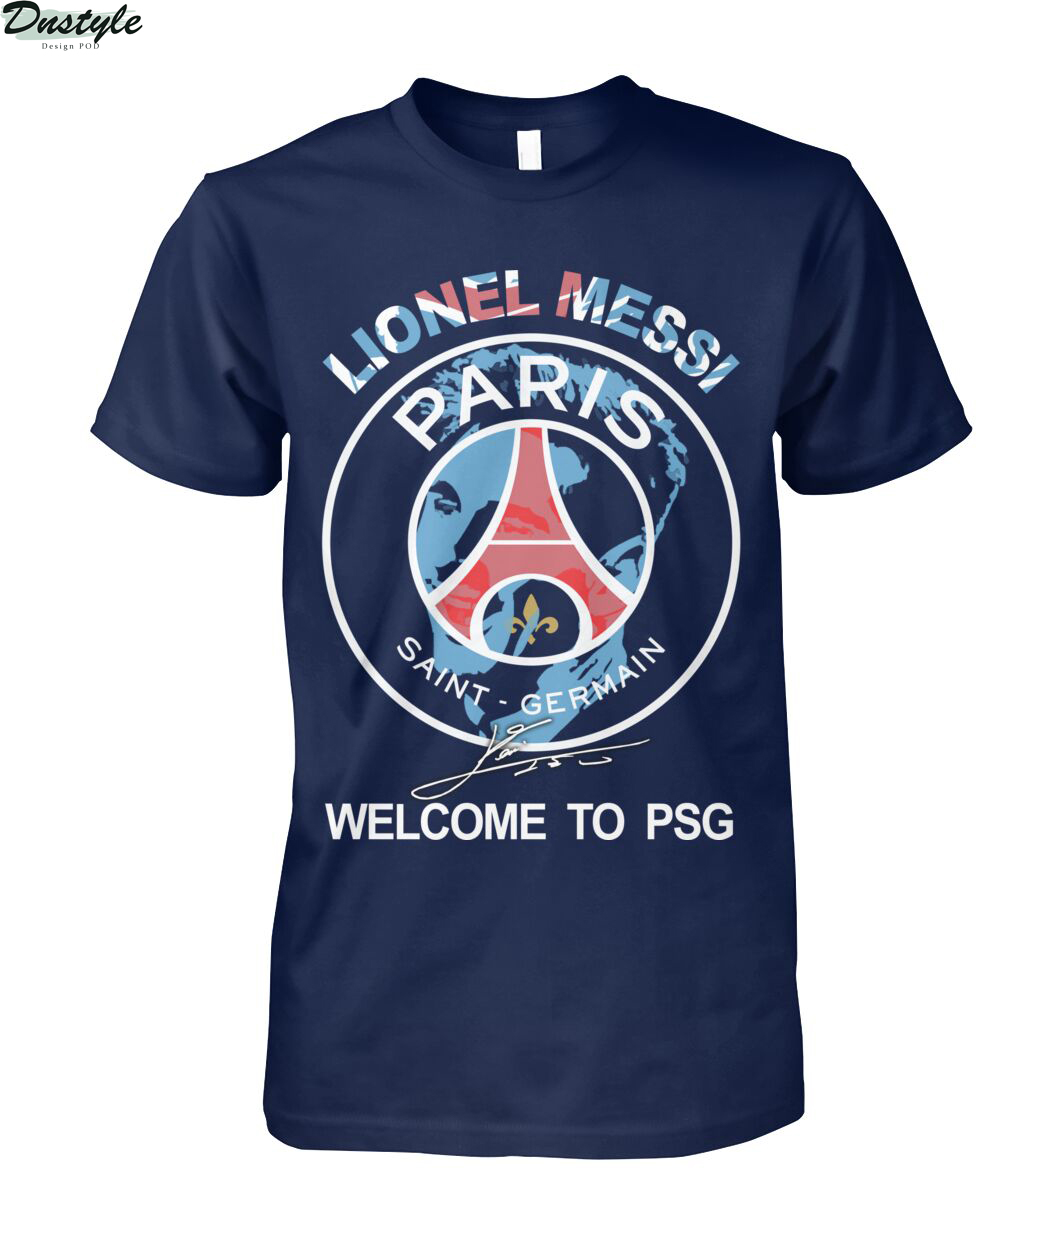 Lionel Messi signature welcome to PSG shirt